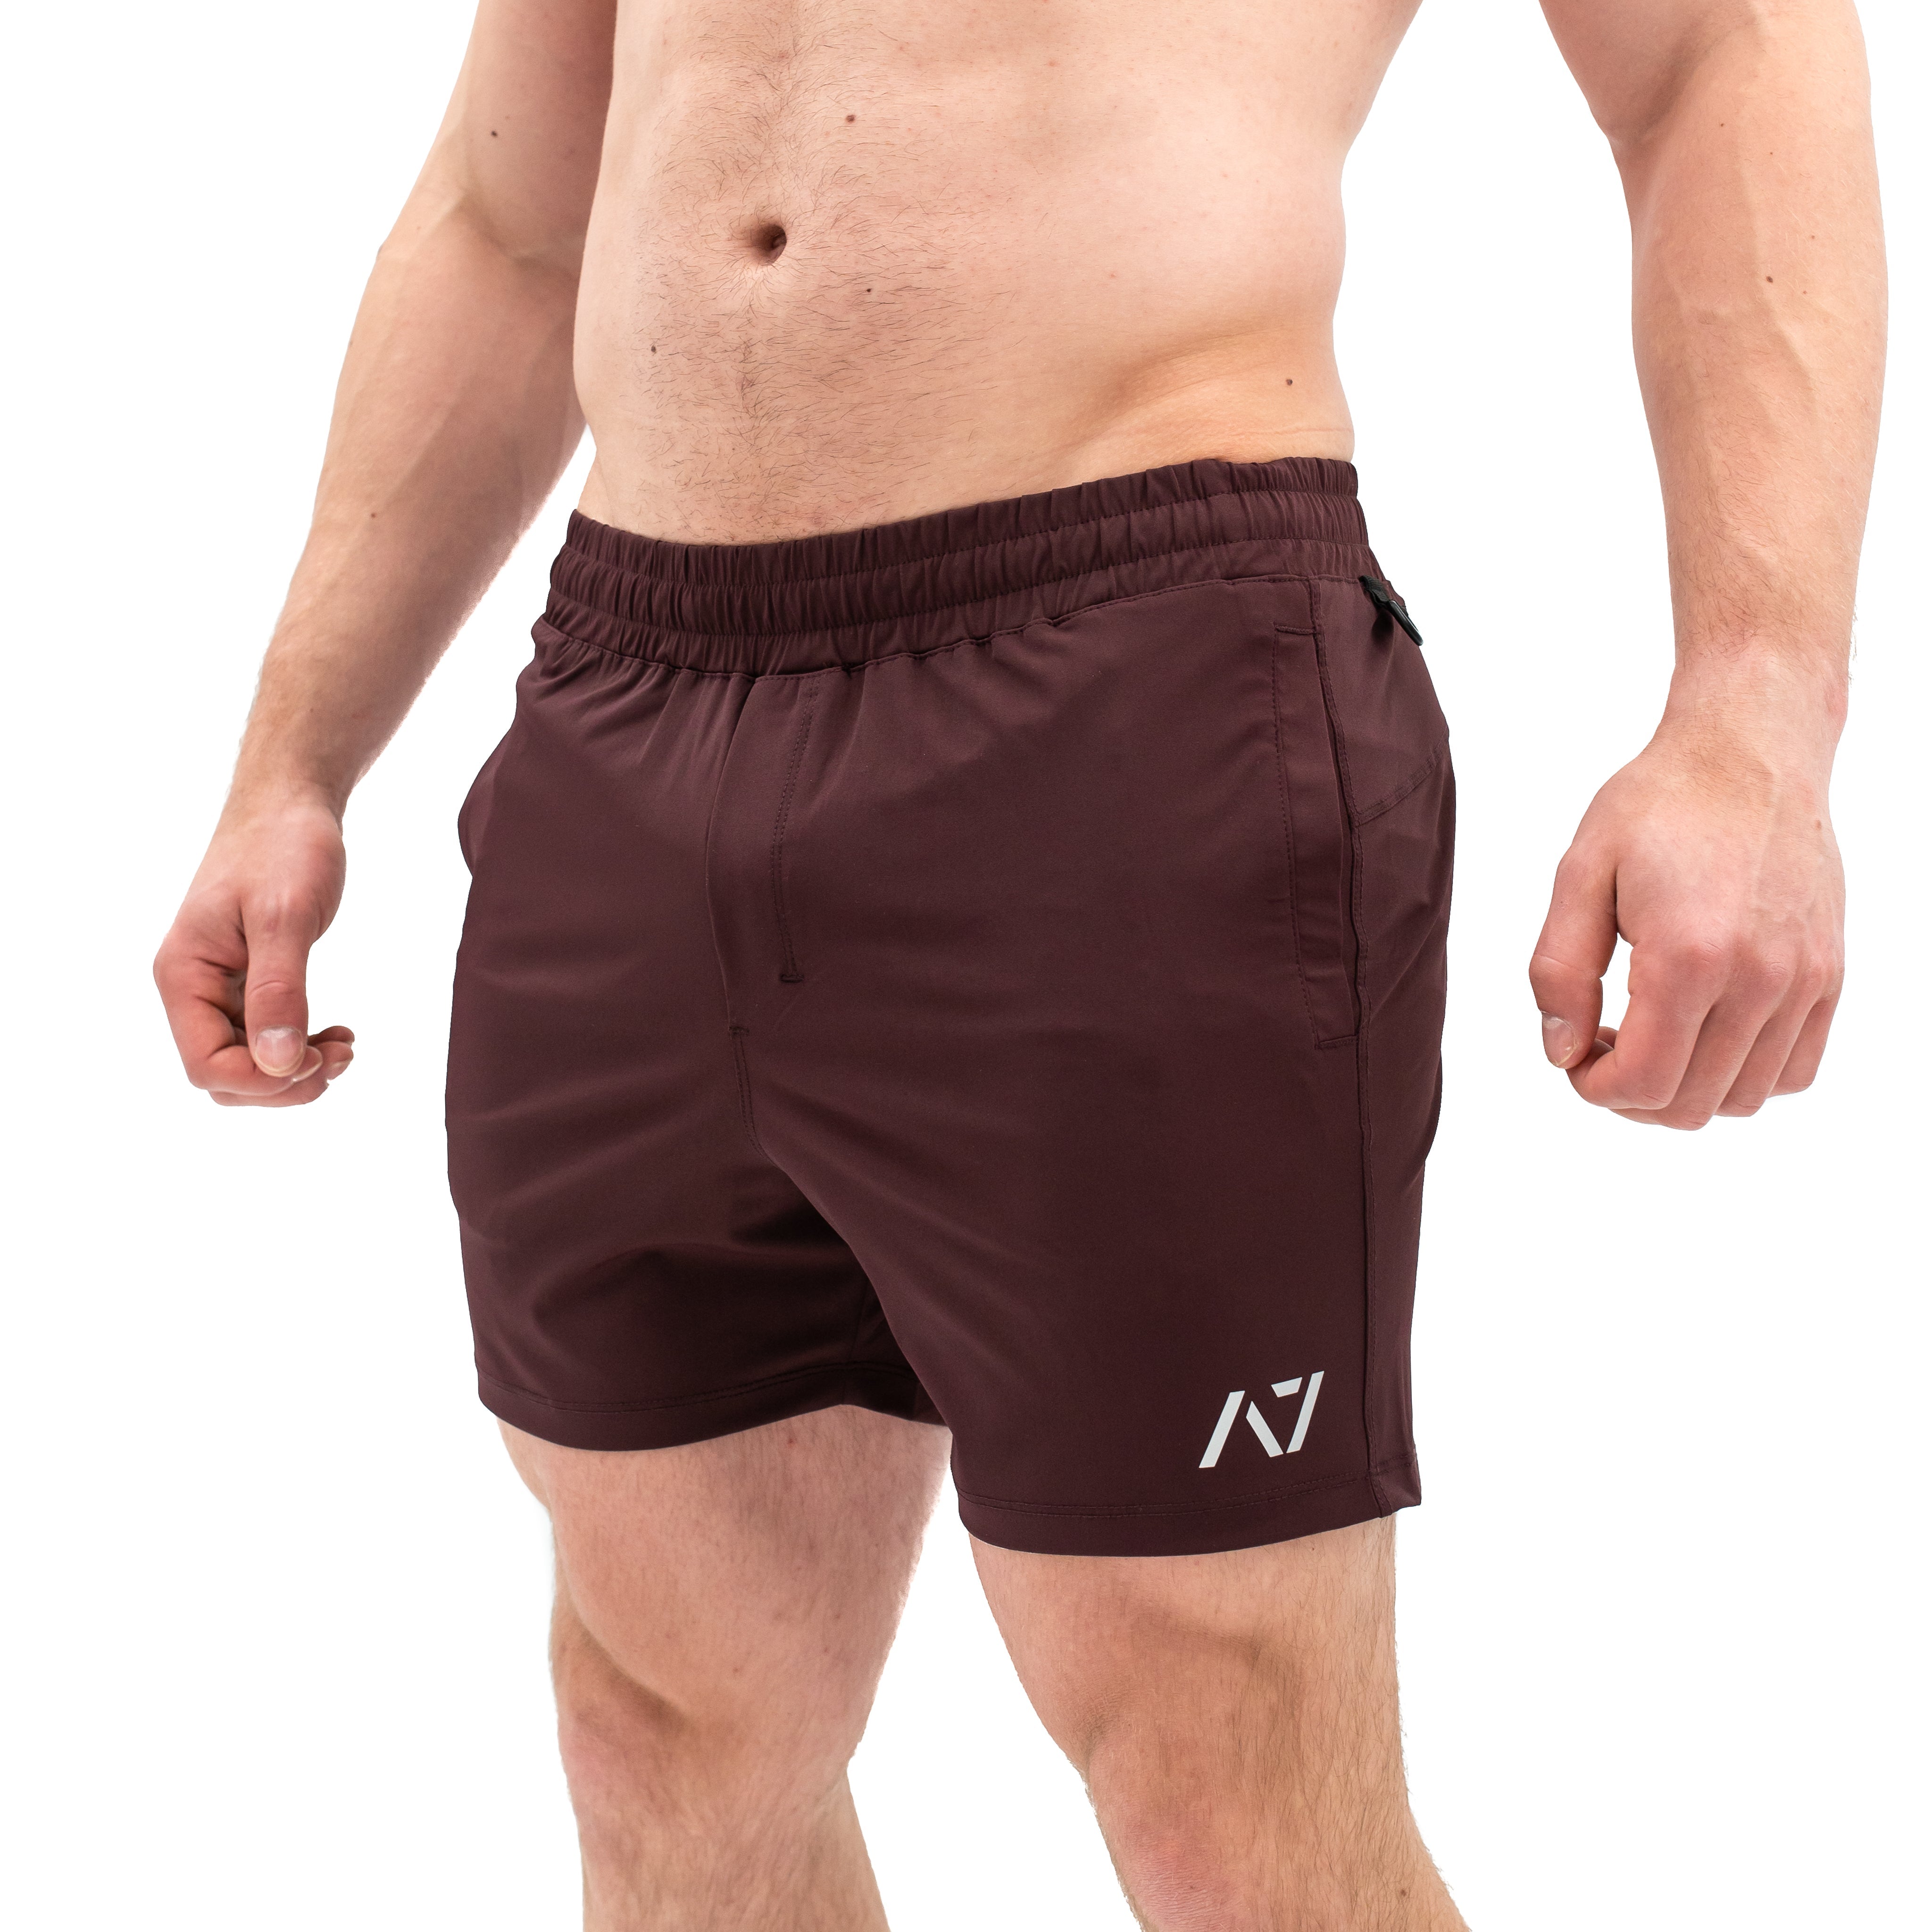 Mahogany 360-GO KWD shorts were created to provide the flexibility for all the movements in your training while offering the comfort and fit you have come to love through our KWD shorts. Purchase 360-GO KWD shorts from A7 UK and A7 Europe. 360-GO KWD shorts are perfect for powerlifting and weightlifting training. Available in UK and Europe including France, Italy, Germany, the Netherlands, Sweden and Poland.